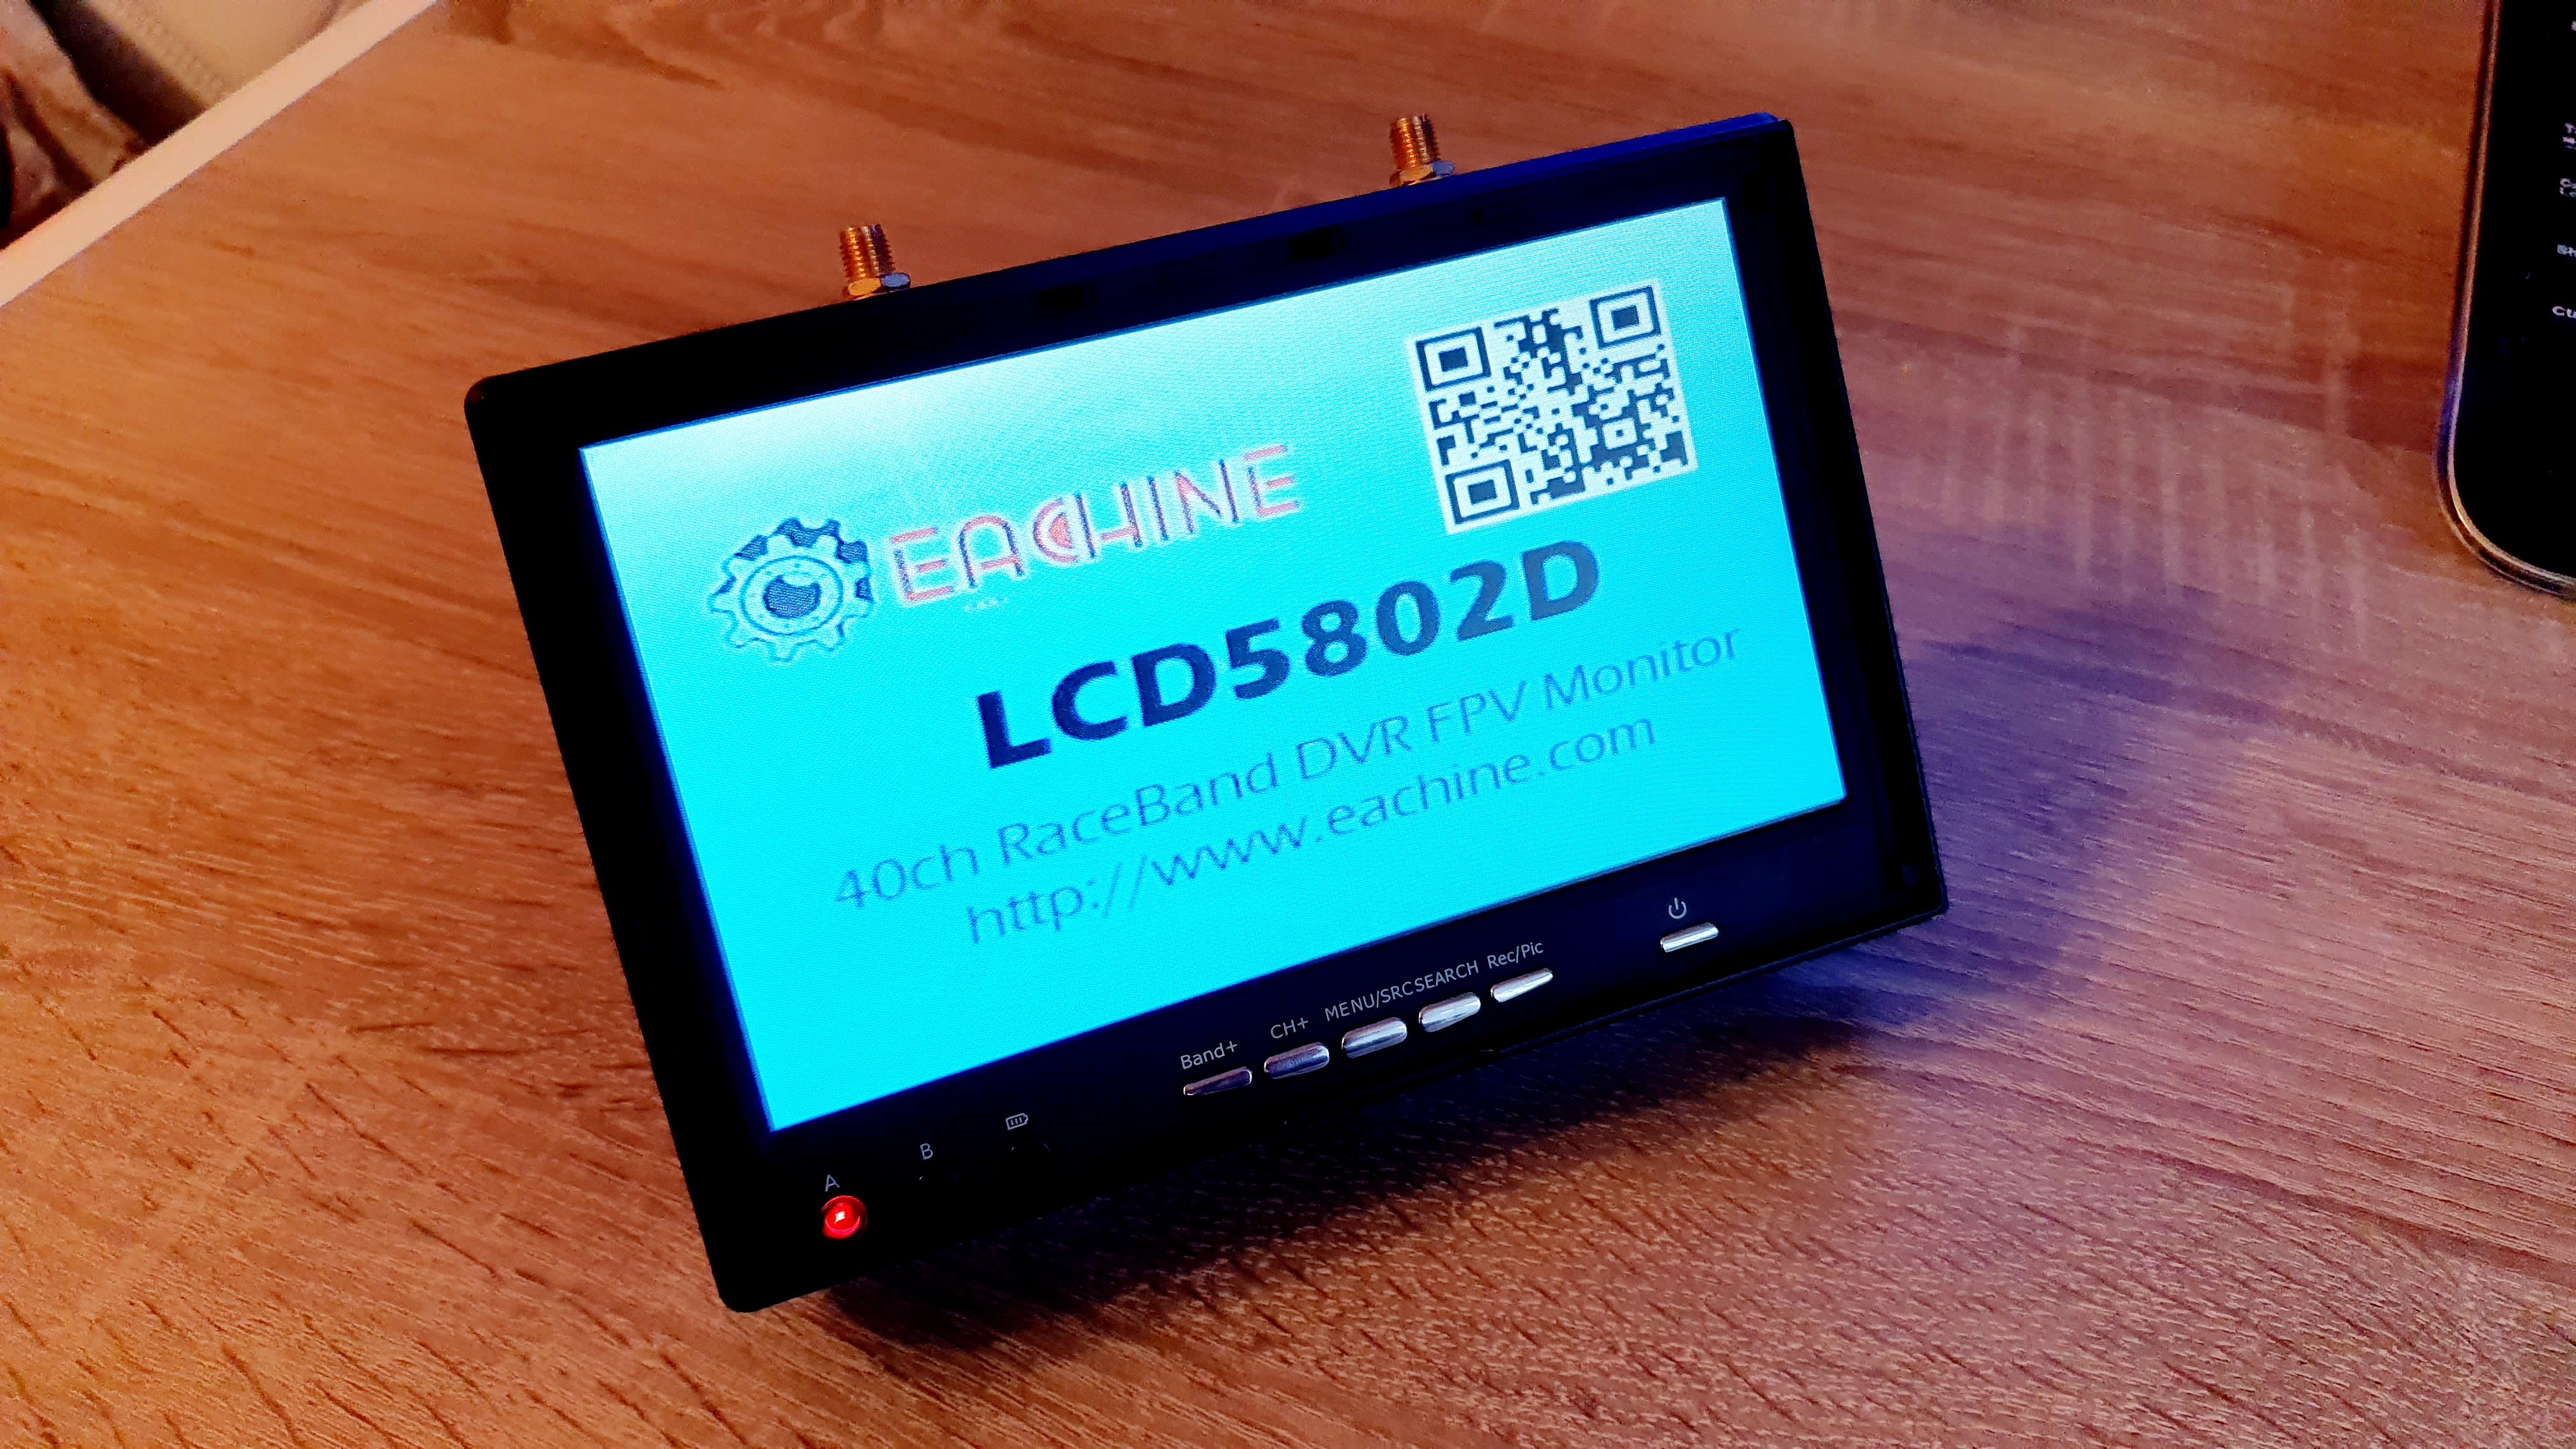 Eachine LCD 5802D 5802S 5,8 Ghz FPV Monitor Stand